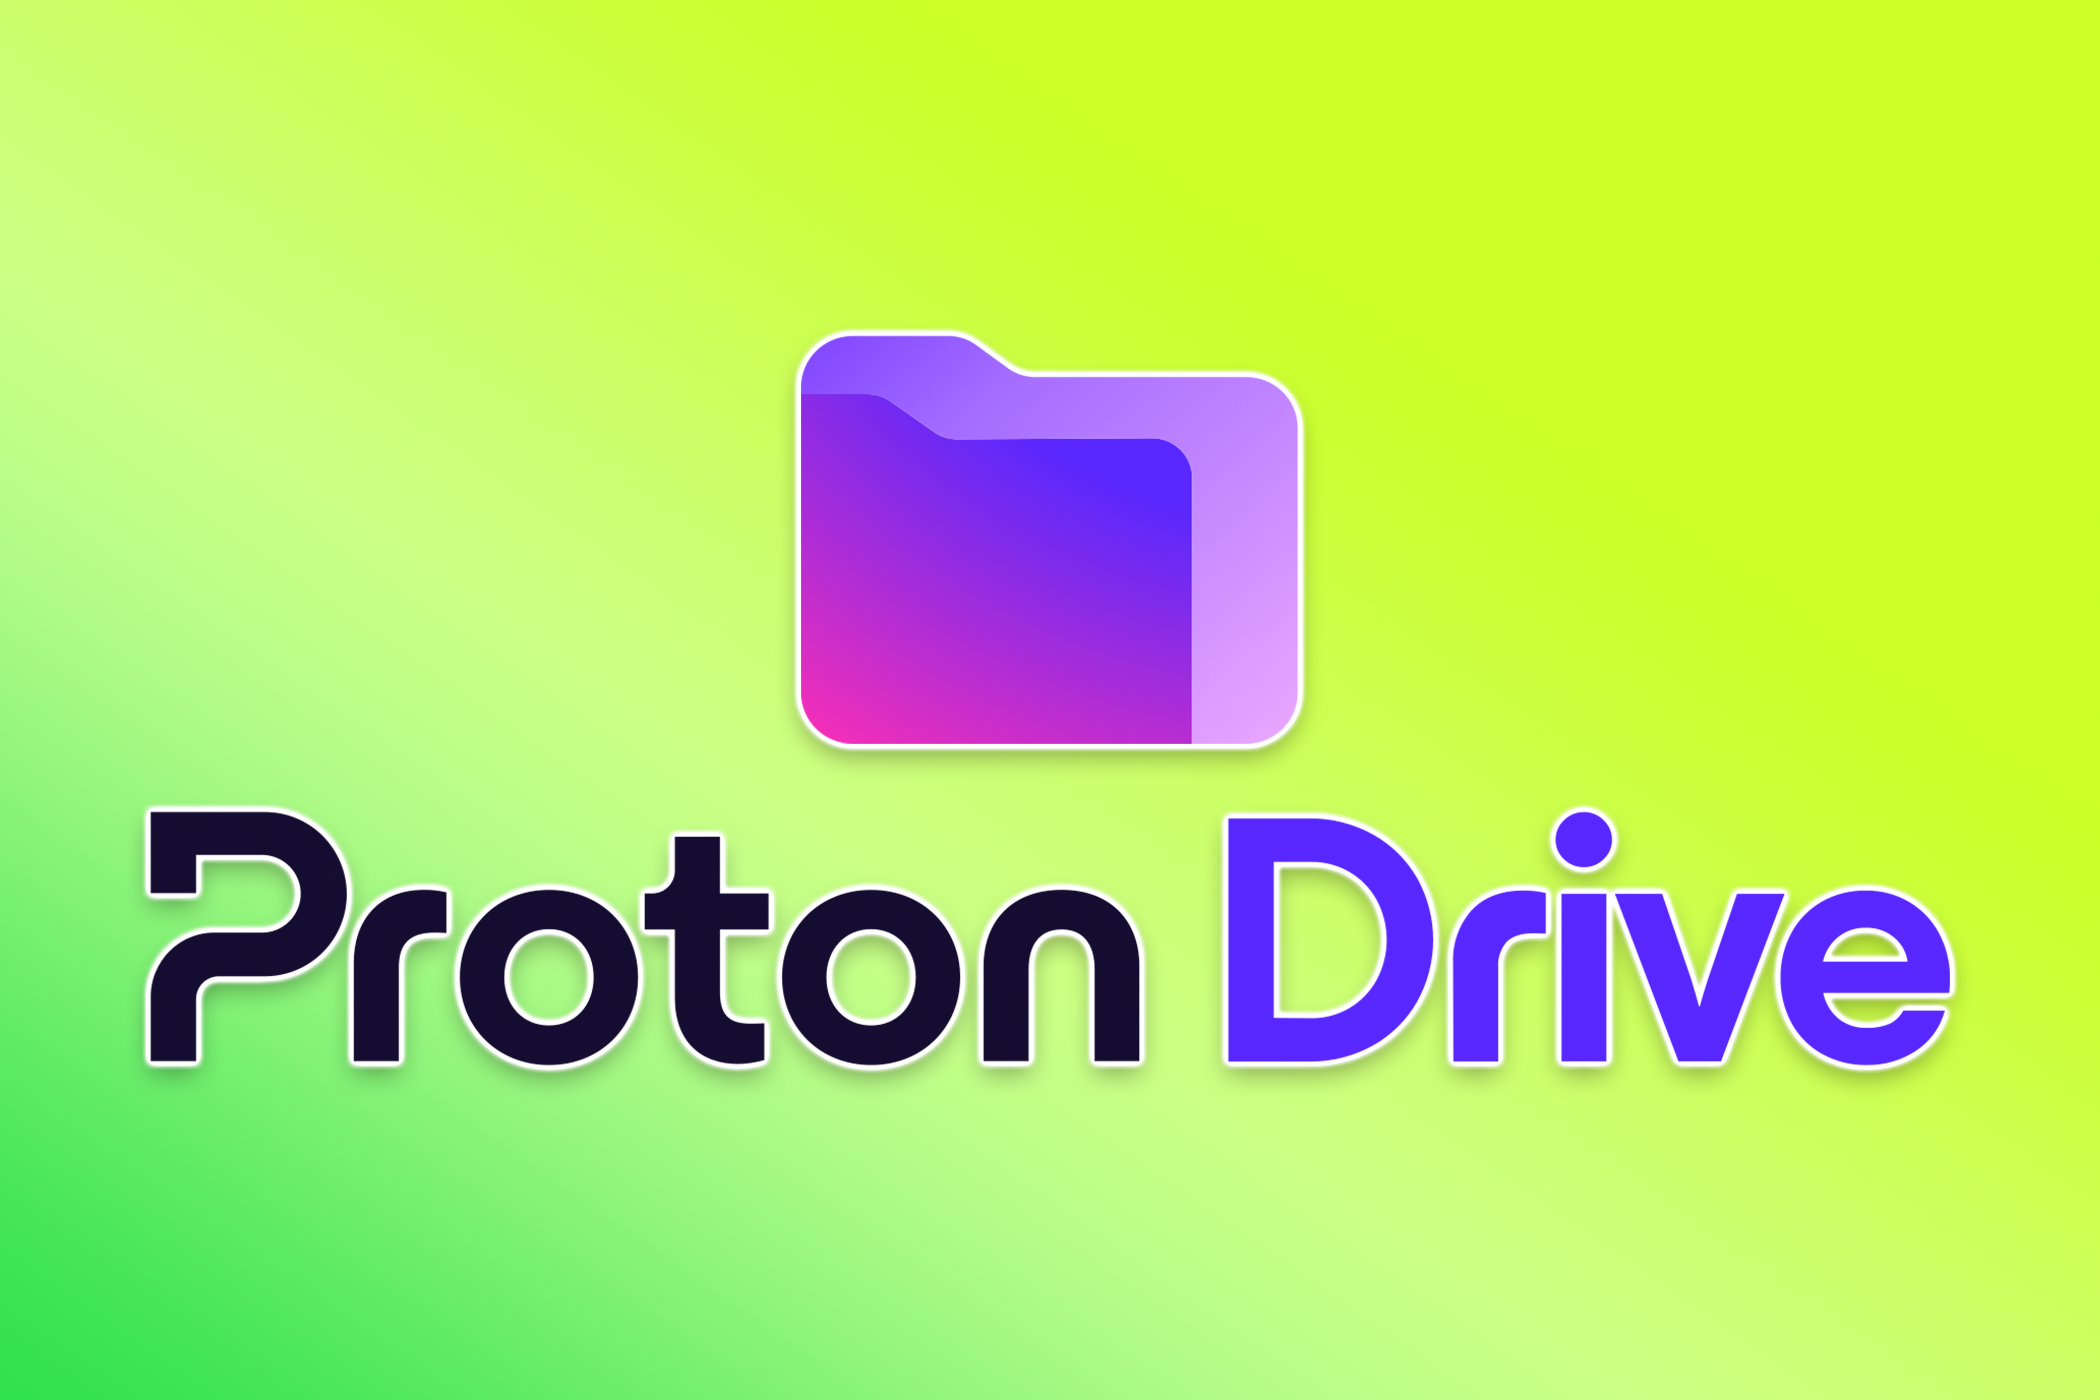 Proton Drive logo on a green background.